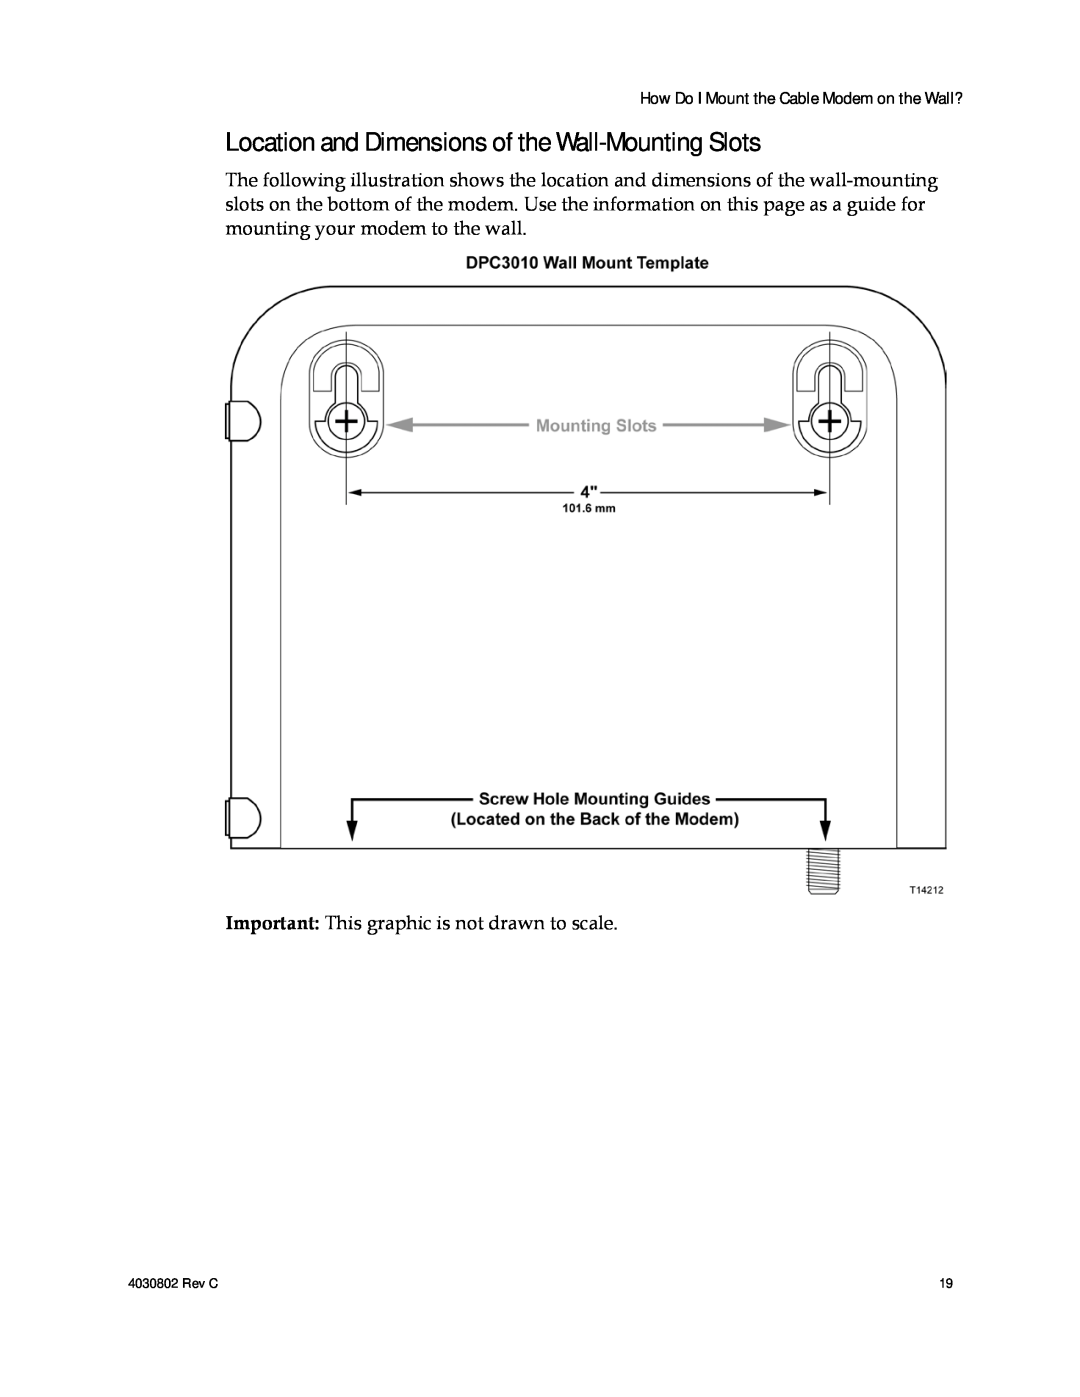 Cisco Systems AAC400210112234, 4027668 Location and Dimensions of the Wall-Mounting Slots, Rev C 